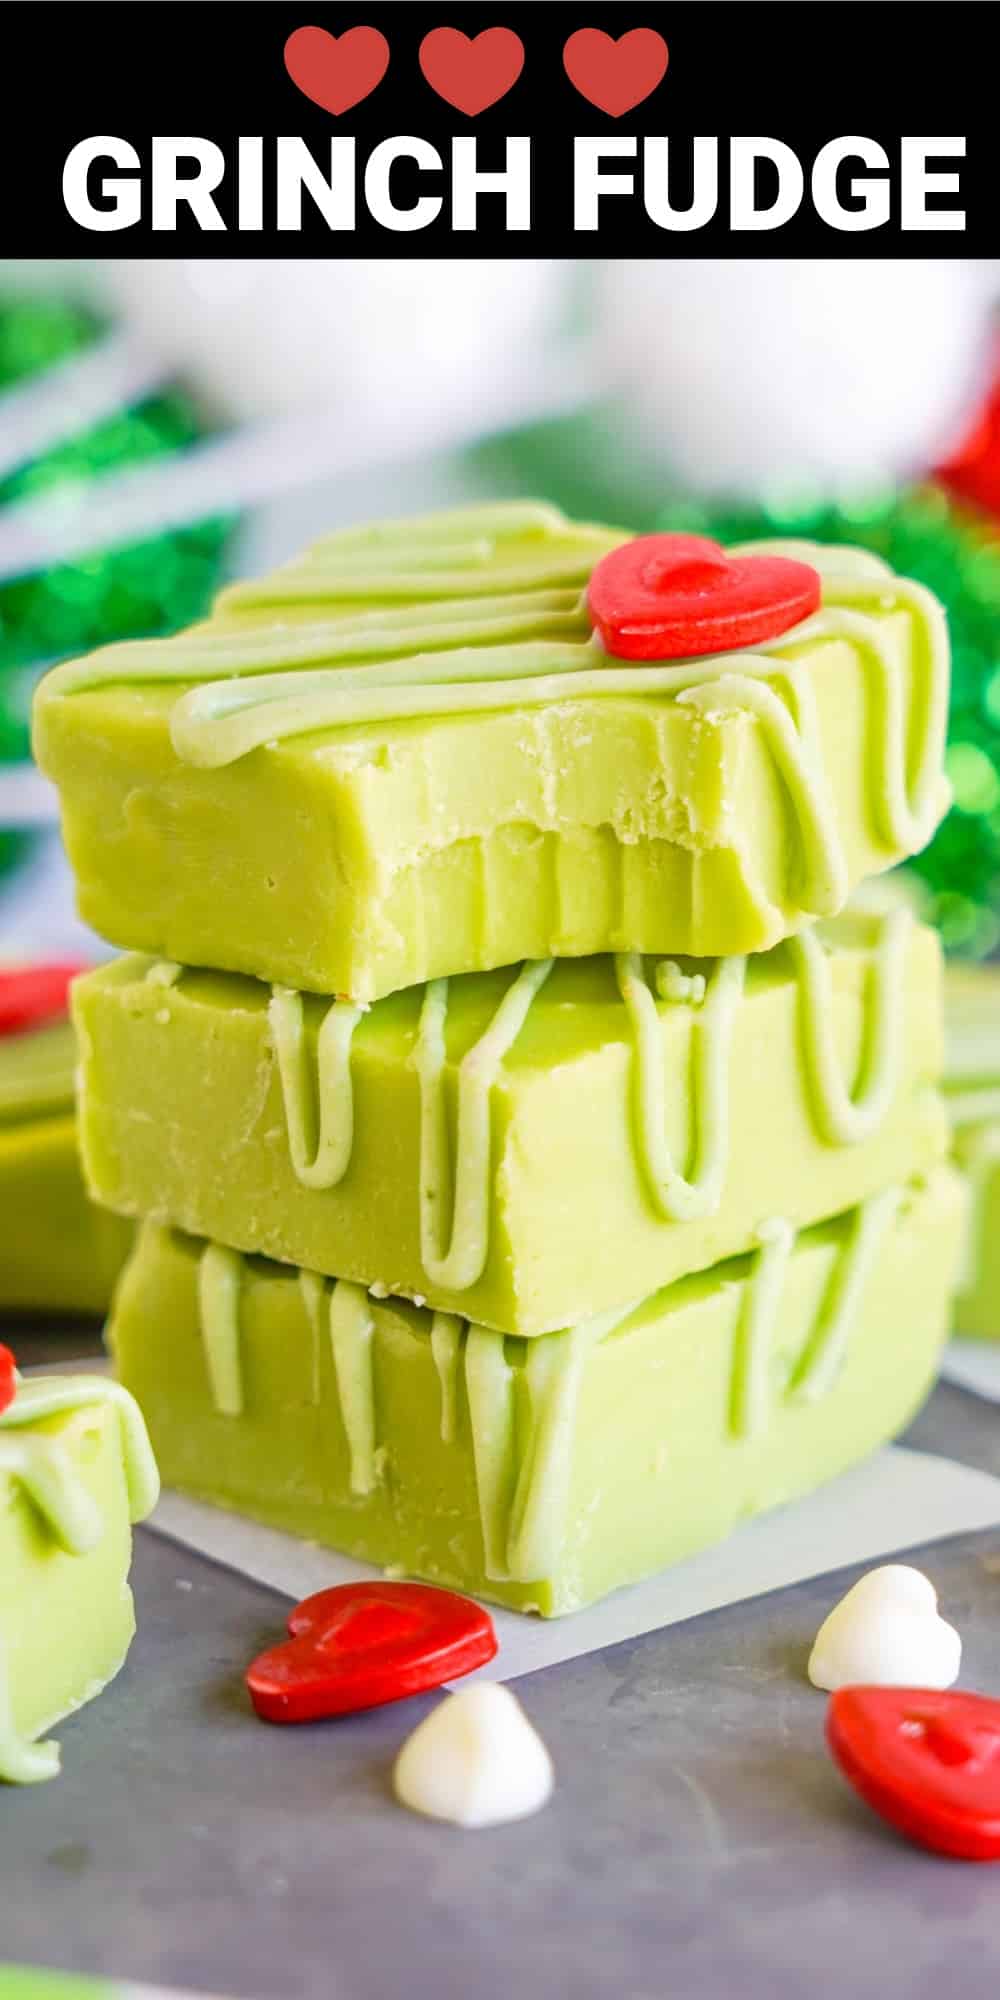 This fun and festive Grinch Fudge recipe makes the perfect sweet treat to help spread the holiday cheer this Christmas season.